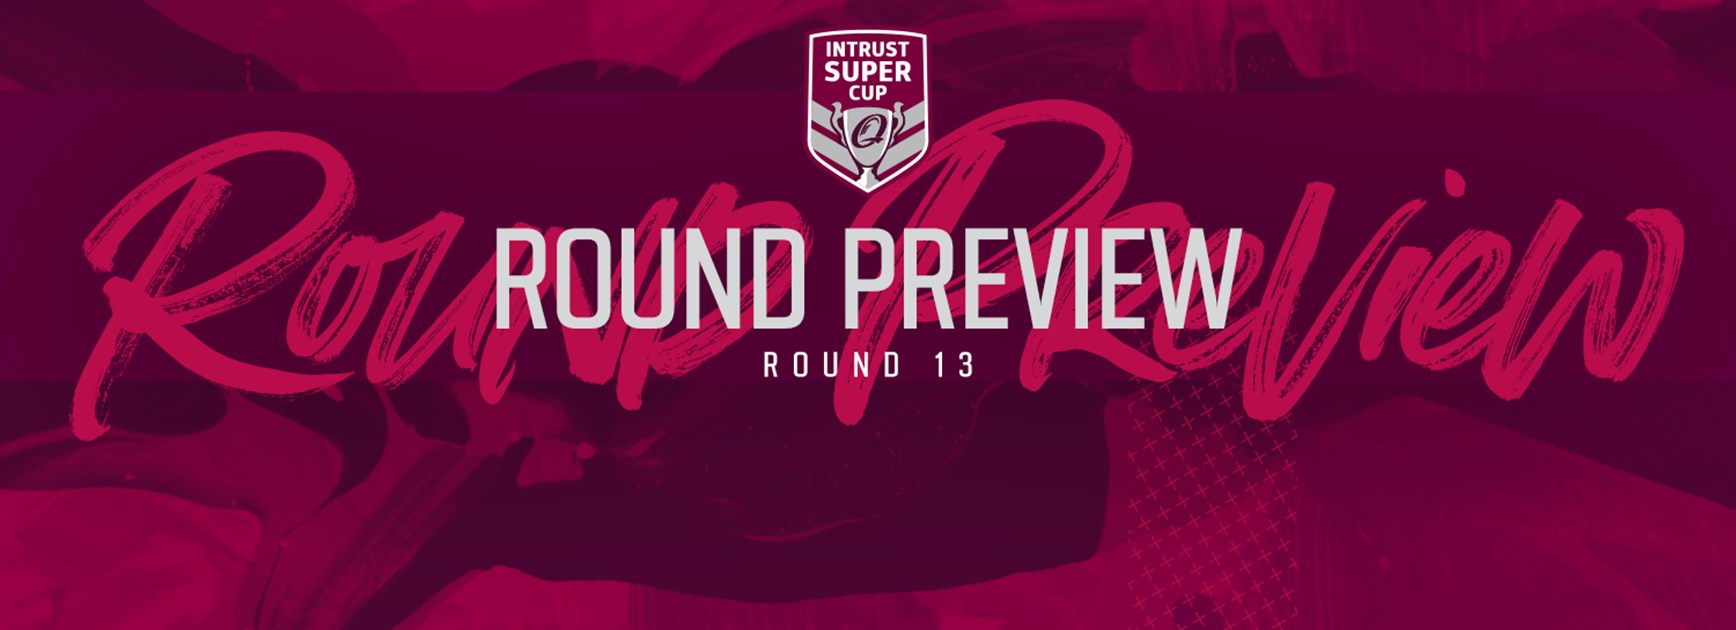 Intrust Super Cup Round 13 preview